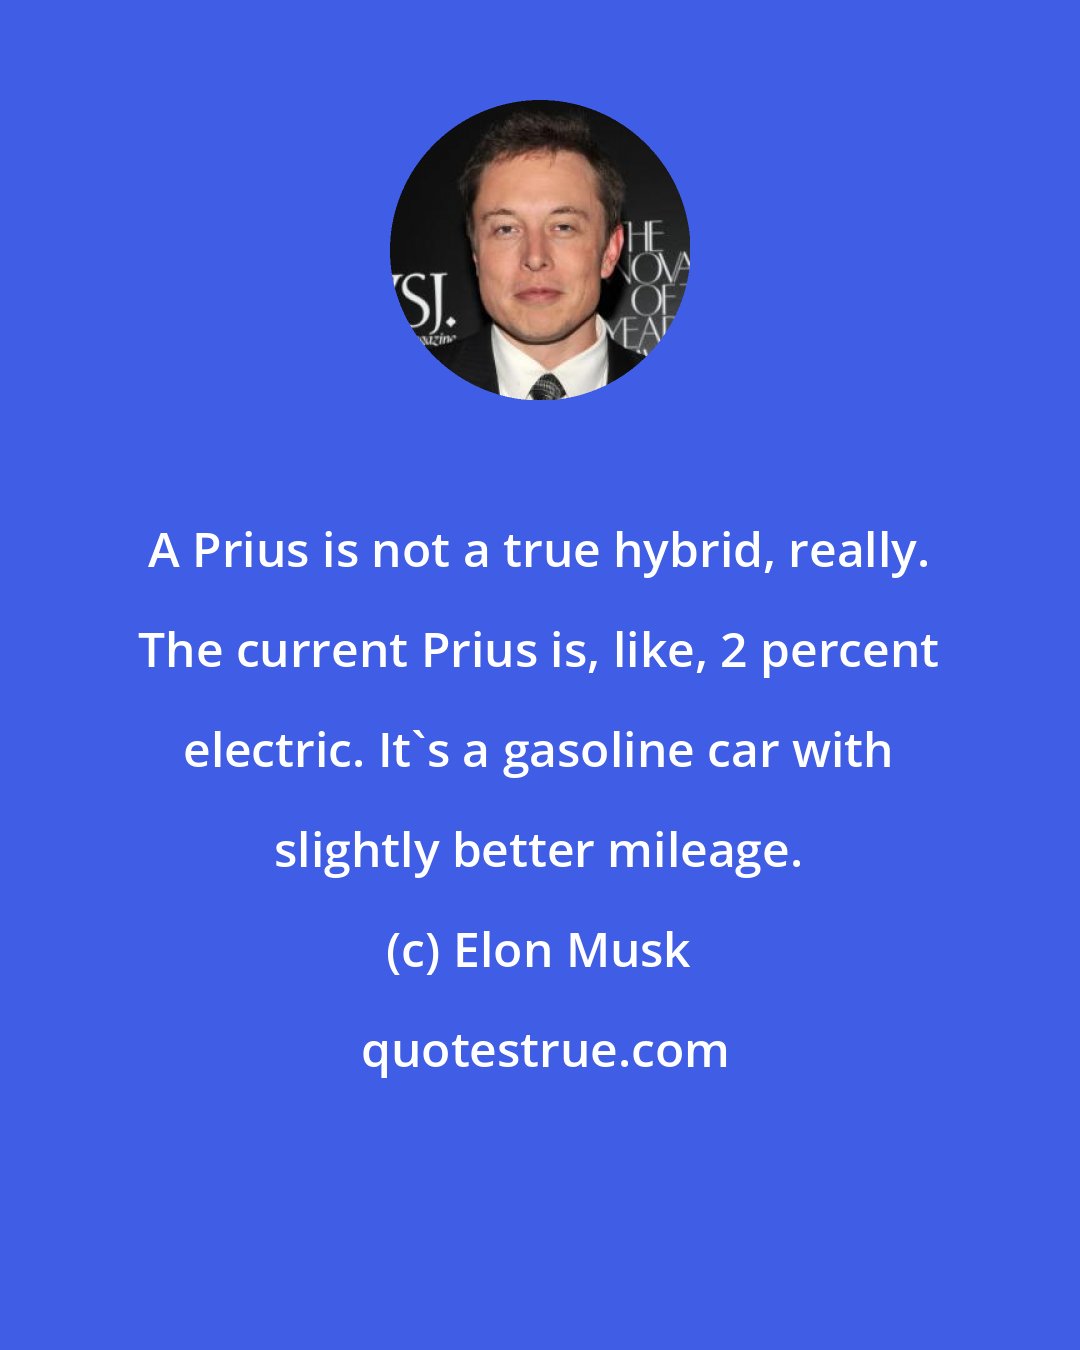 Elon Musk: A Prius is not a true hybrid, really. The current Prius is, like, 2 percent electric. It's a gasoline car with slightly better mileage.